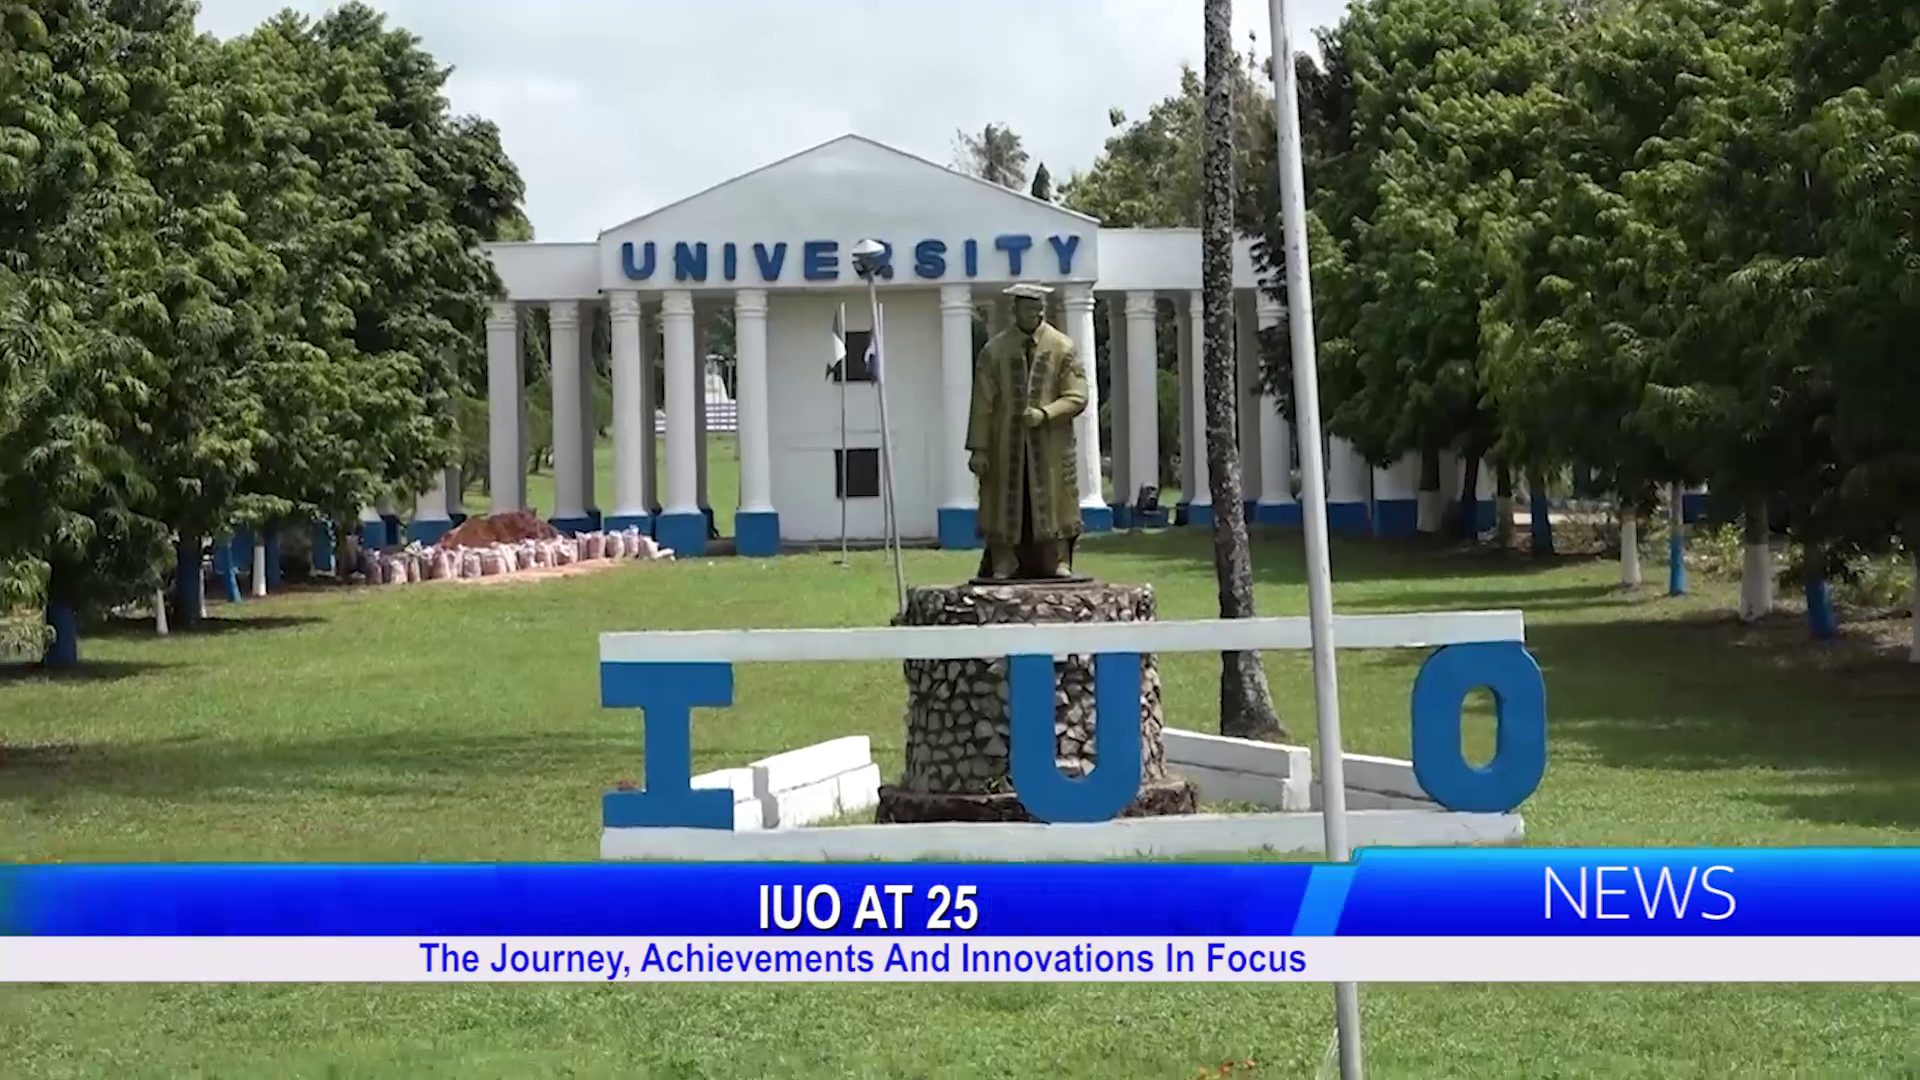 IUO AT 25: The Journey, Achievements And Innovations In Focus